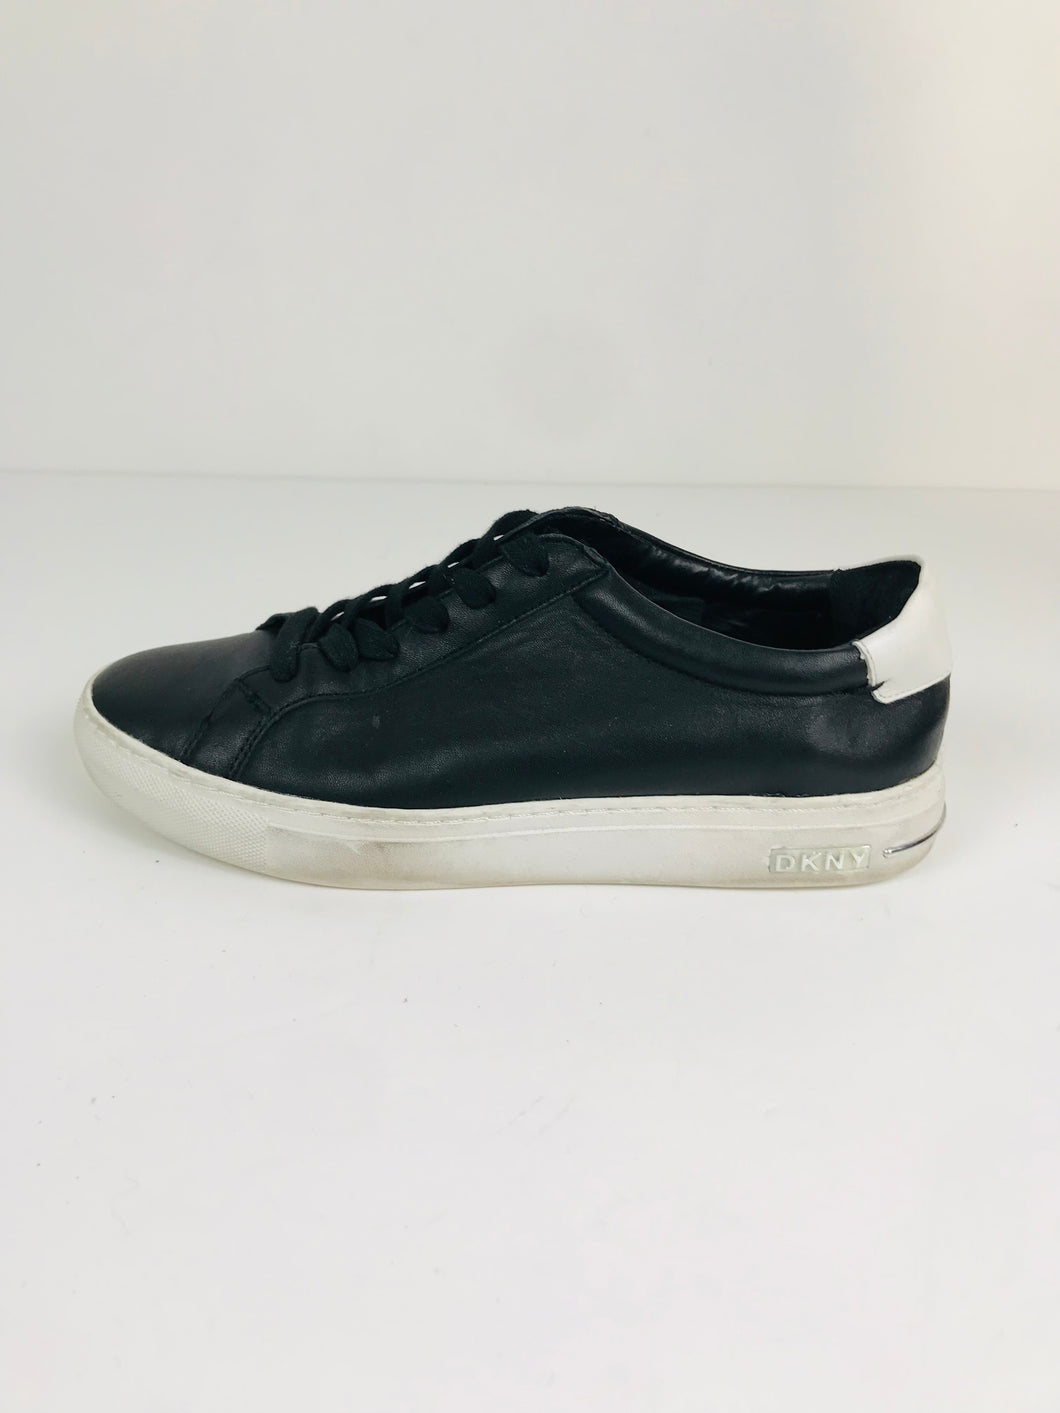 DKNY Women's Leather Trainers | UK5.5 | Black